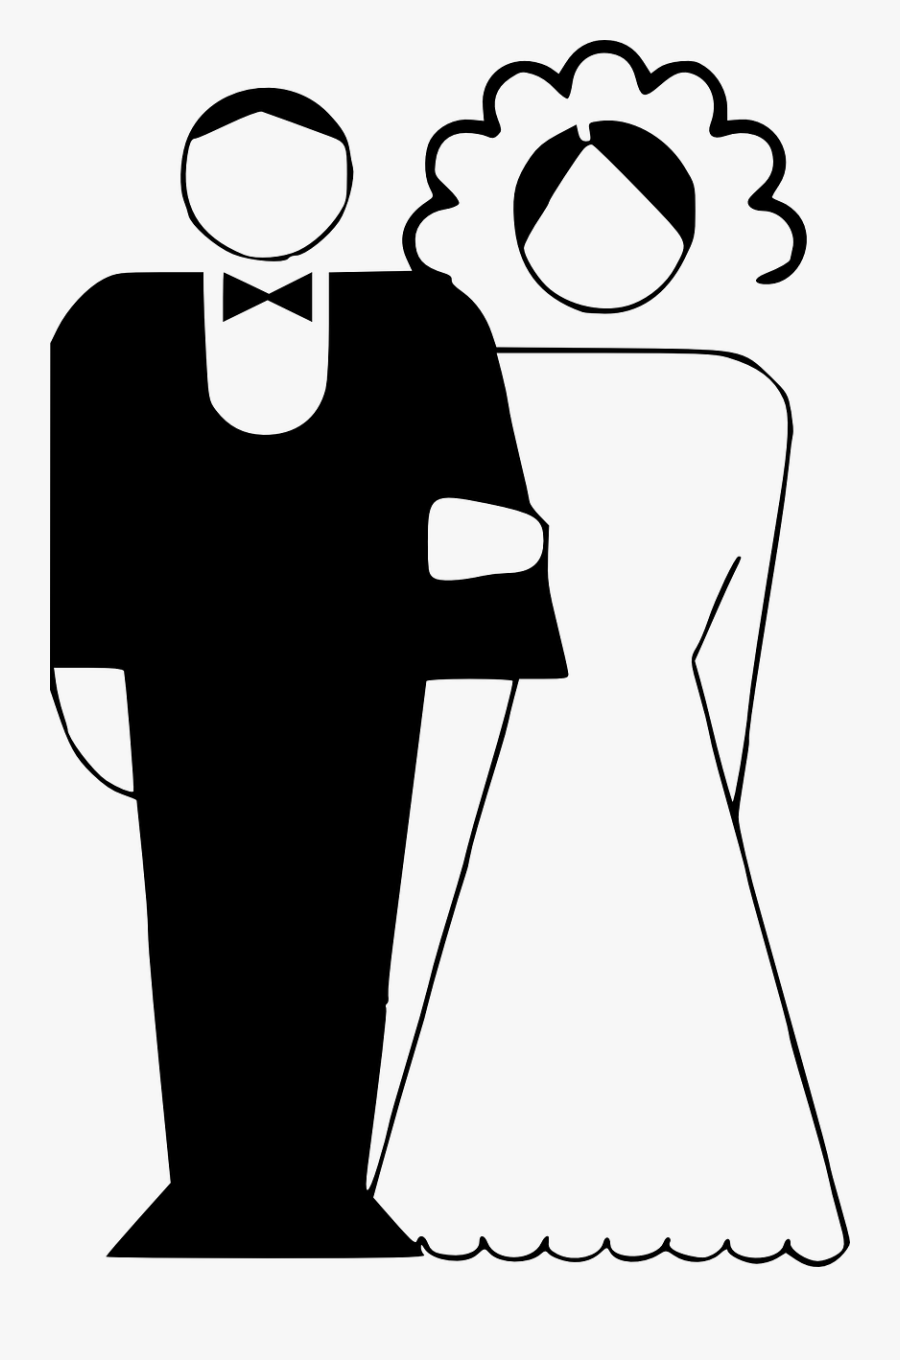 Black & White Bride And Groom Clip Art At Clker - Marriage Black And White Clipart, Transparent Clipart